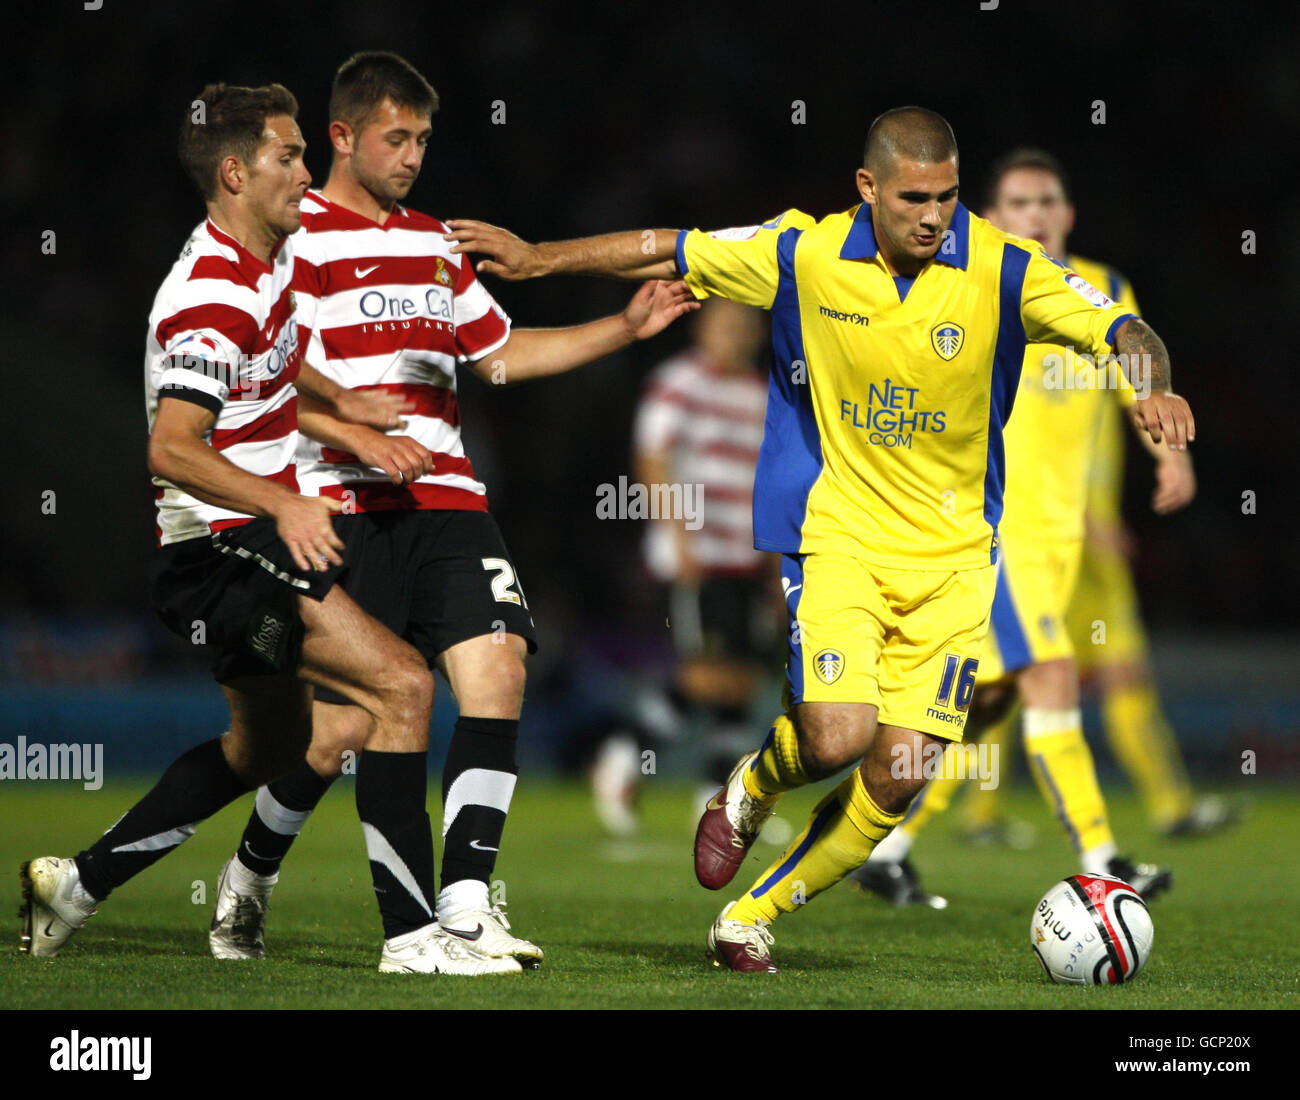 Leeds United's Bradley Johnson (right) holds off Doncaster Rovers Martin Woods (left) and Waide Fairhurst during the npower Football League Championship match at the Keepmoat Stadium, Doncaster. Stock Photo